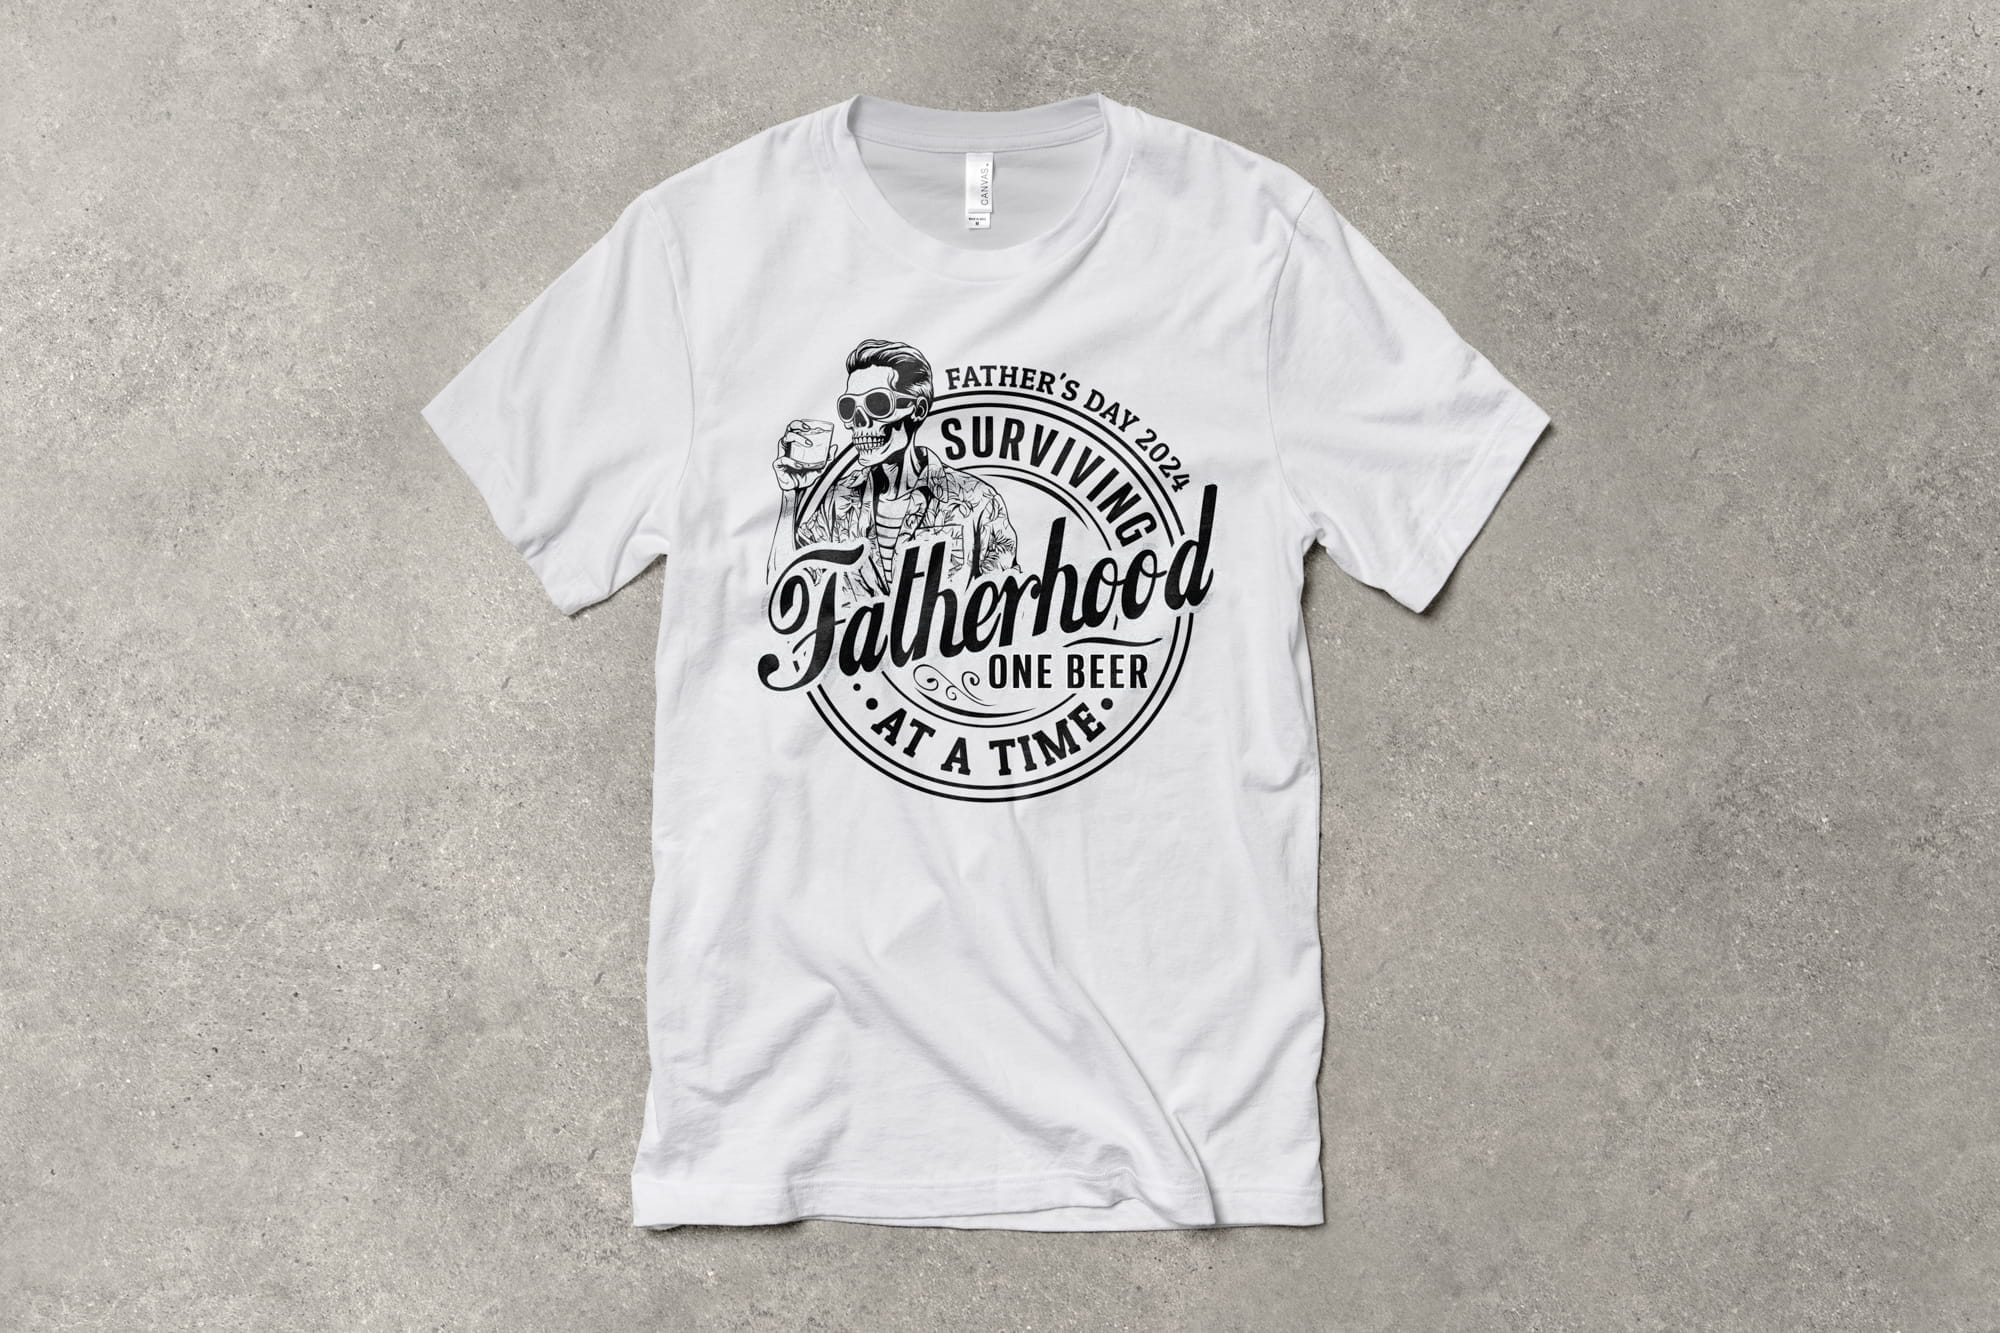 A flat t-shirt that has a customizable design that says "Surviving Fatherhood one beer at a time"